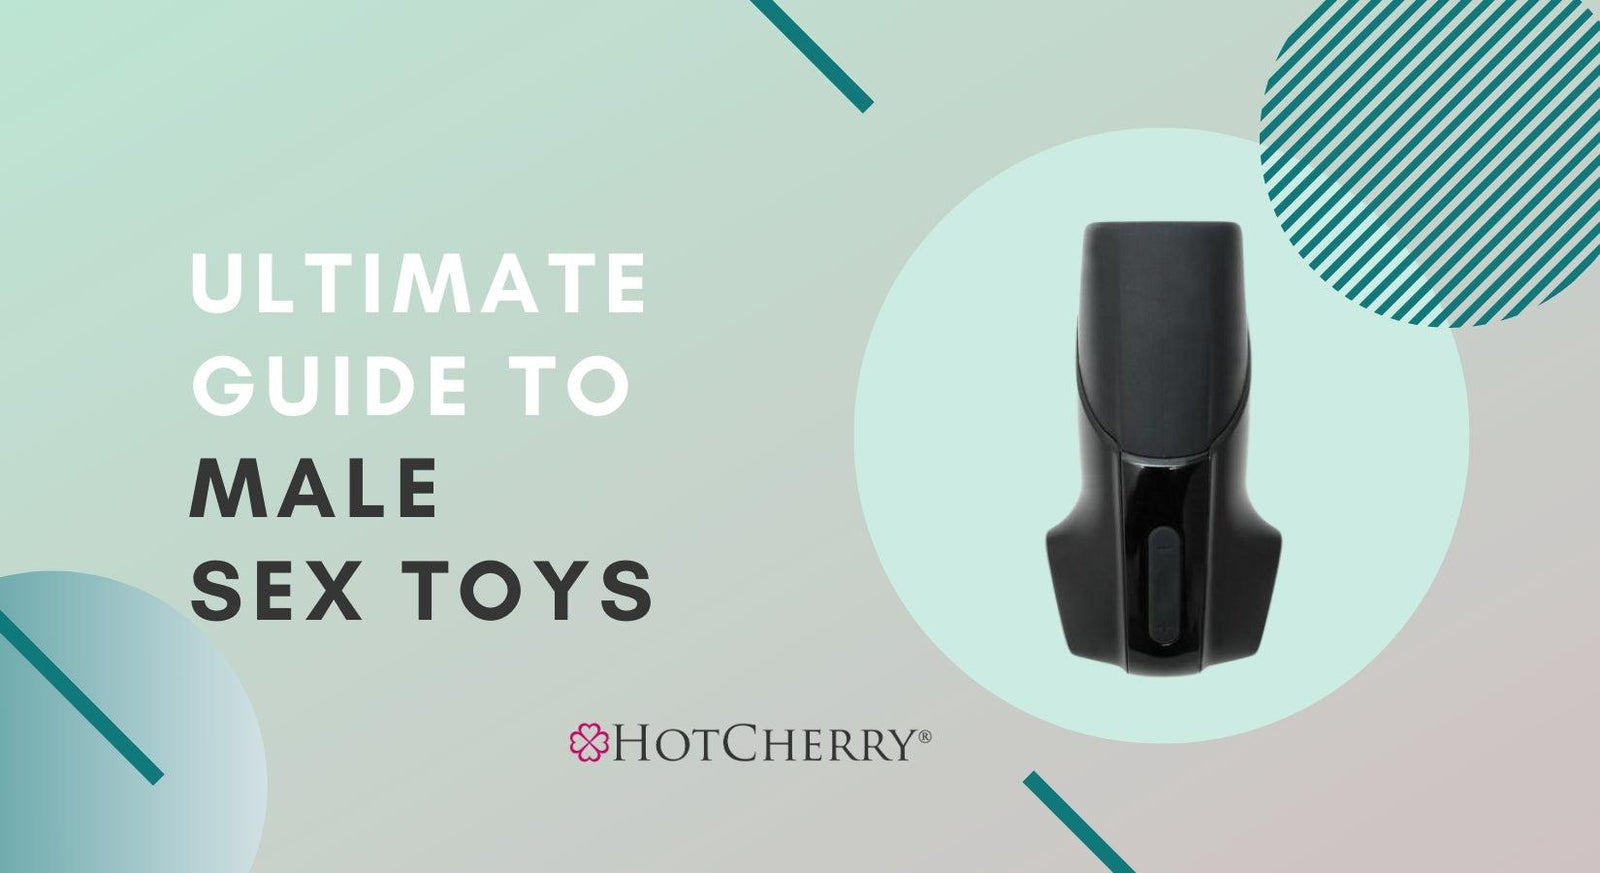 Ultimate Guide to Male Sex Toys